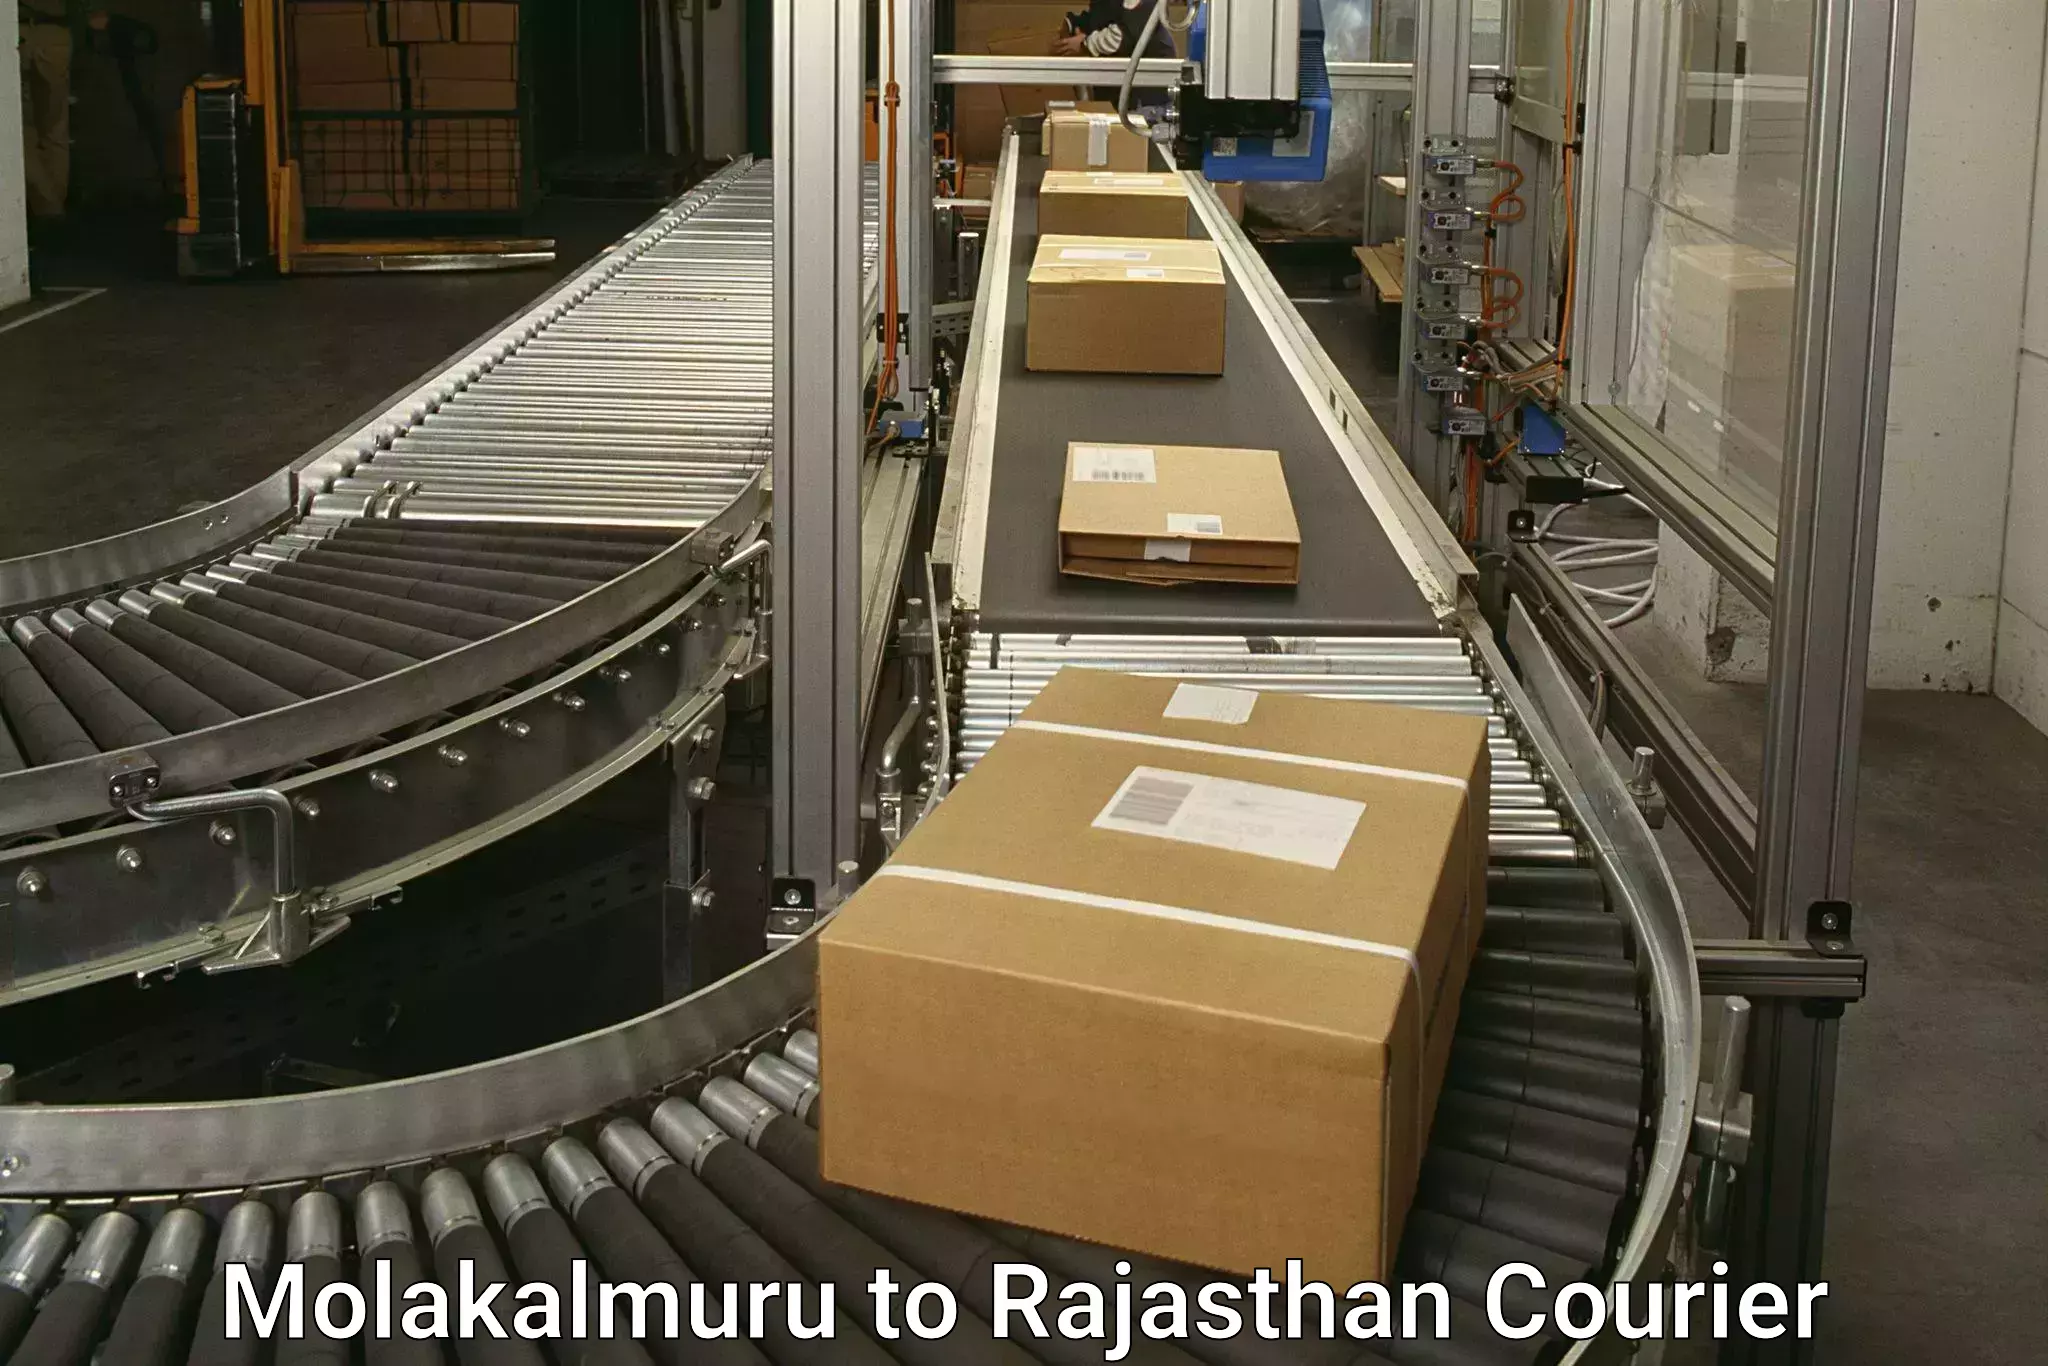 State-of-the-art courier technology Molakalmuru to Rajasthan